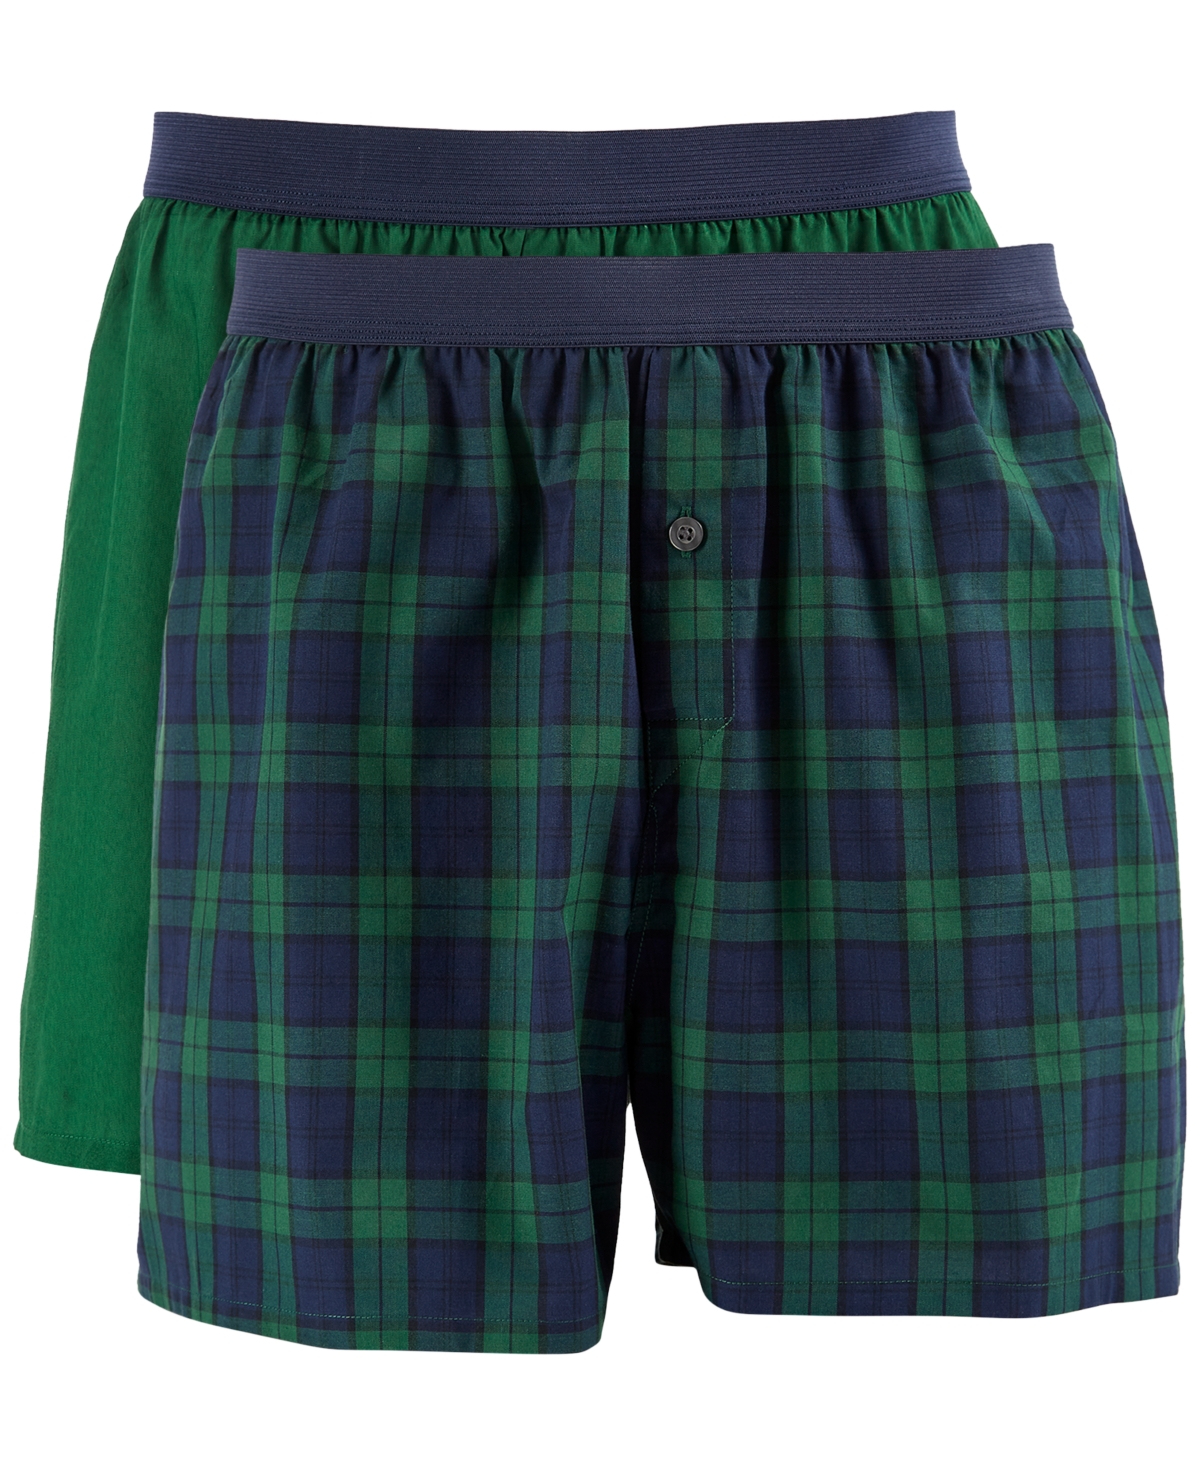 Club Room Men's 2-pk. Plaid & Solid Boxer Shorts, Created for Macy's